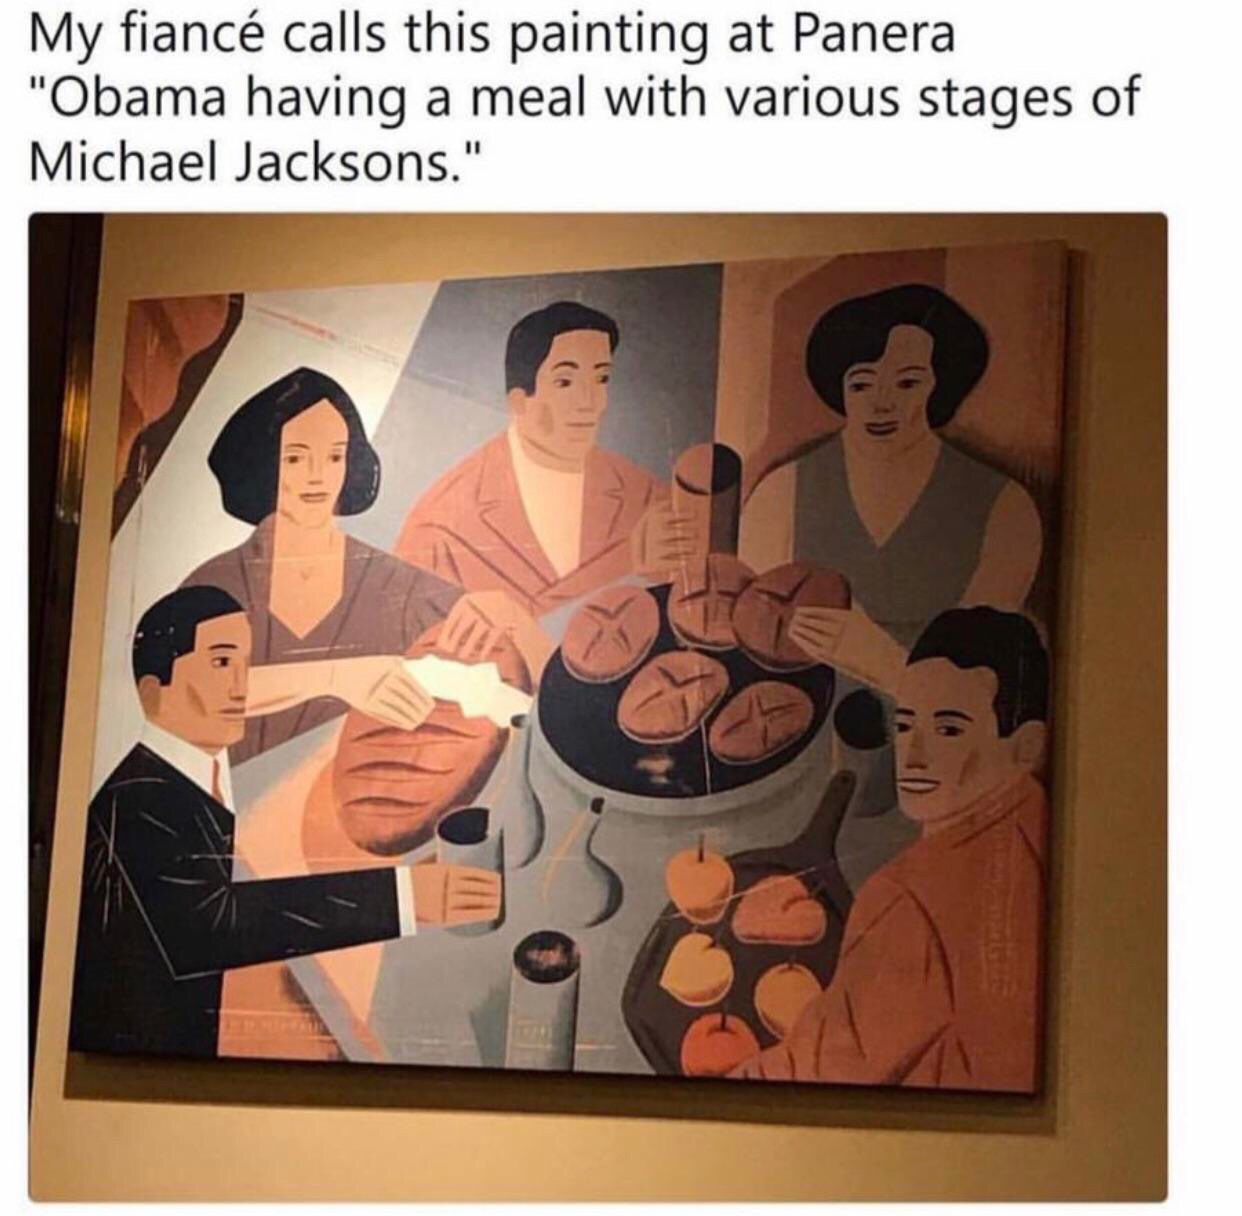 funny classical art memes - My fianc calls this painting at Panera "Obama having a meal with various stages of Michael Jacksons."